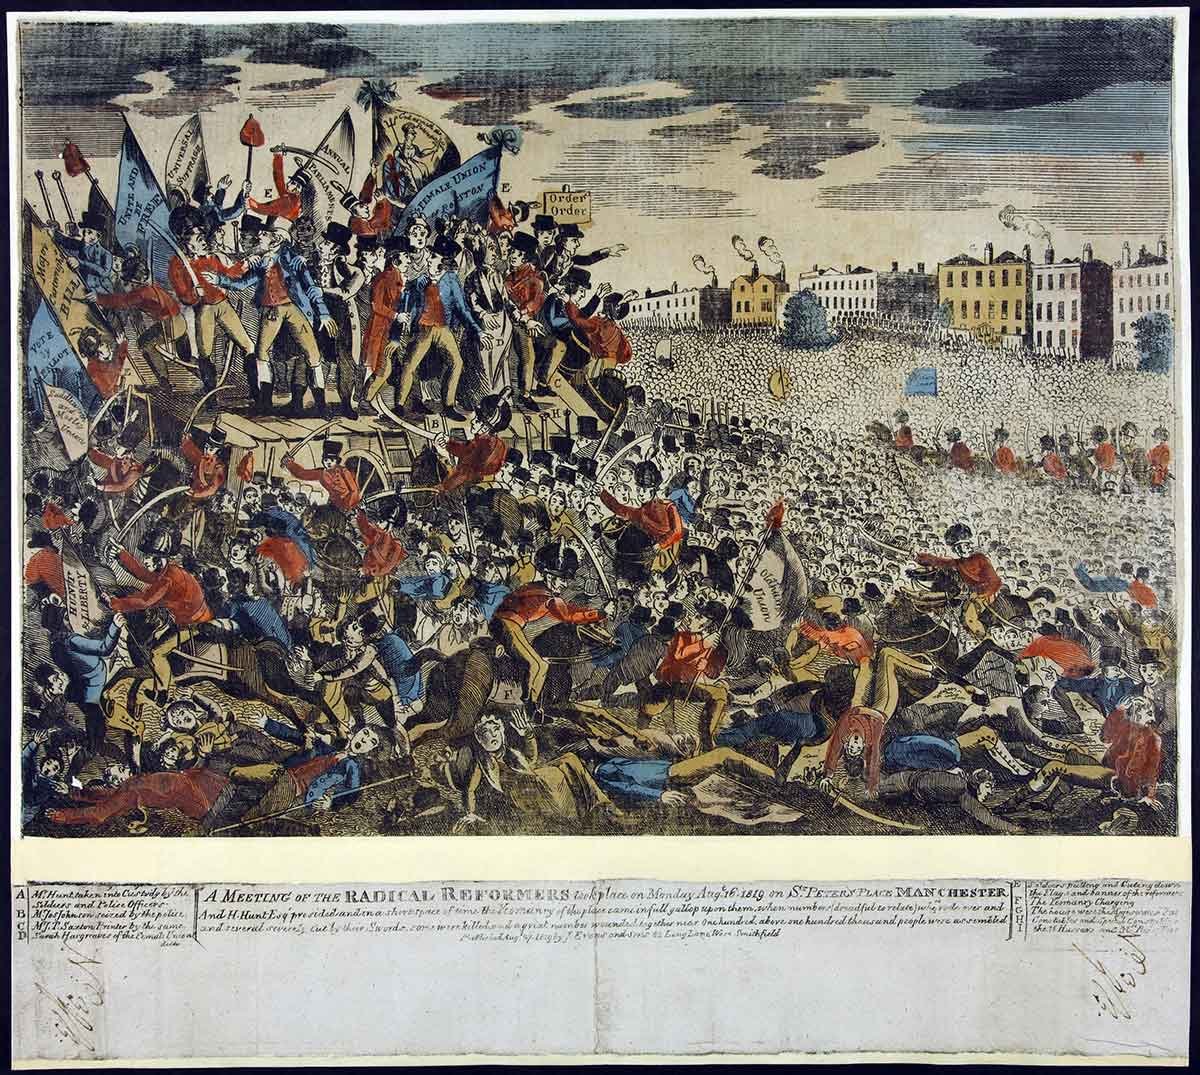 A colourful illustration of a large crowd of people being attacked by soldiers with sword on horses